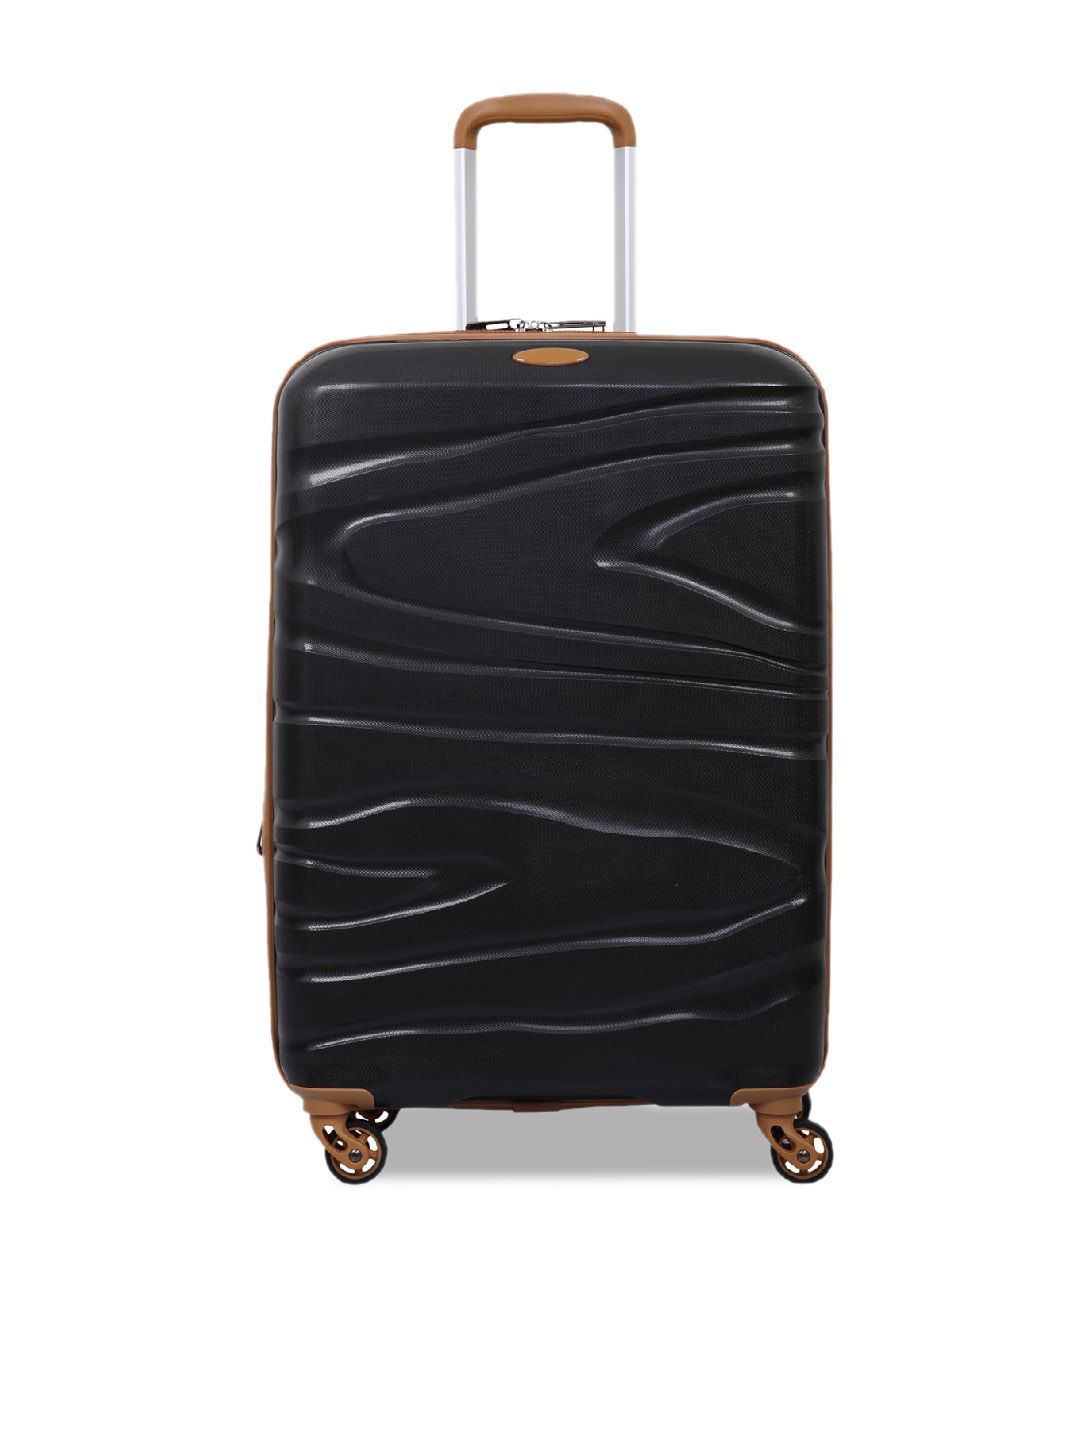 Polo Class Black Solid Polycarbonate Scan Cabin Trolley Bag Price in India